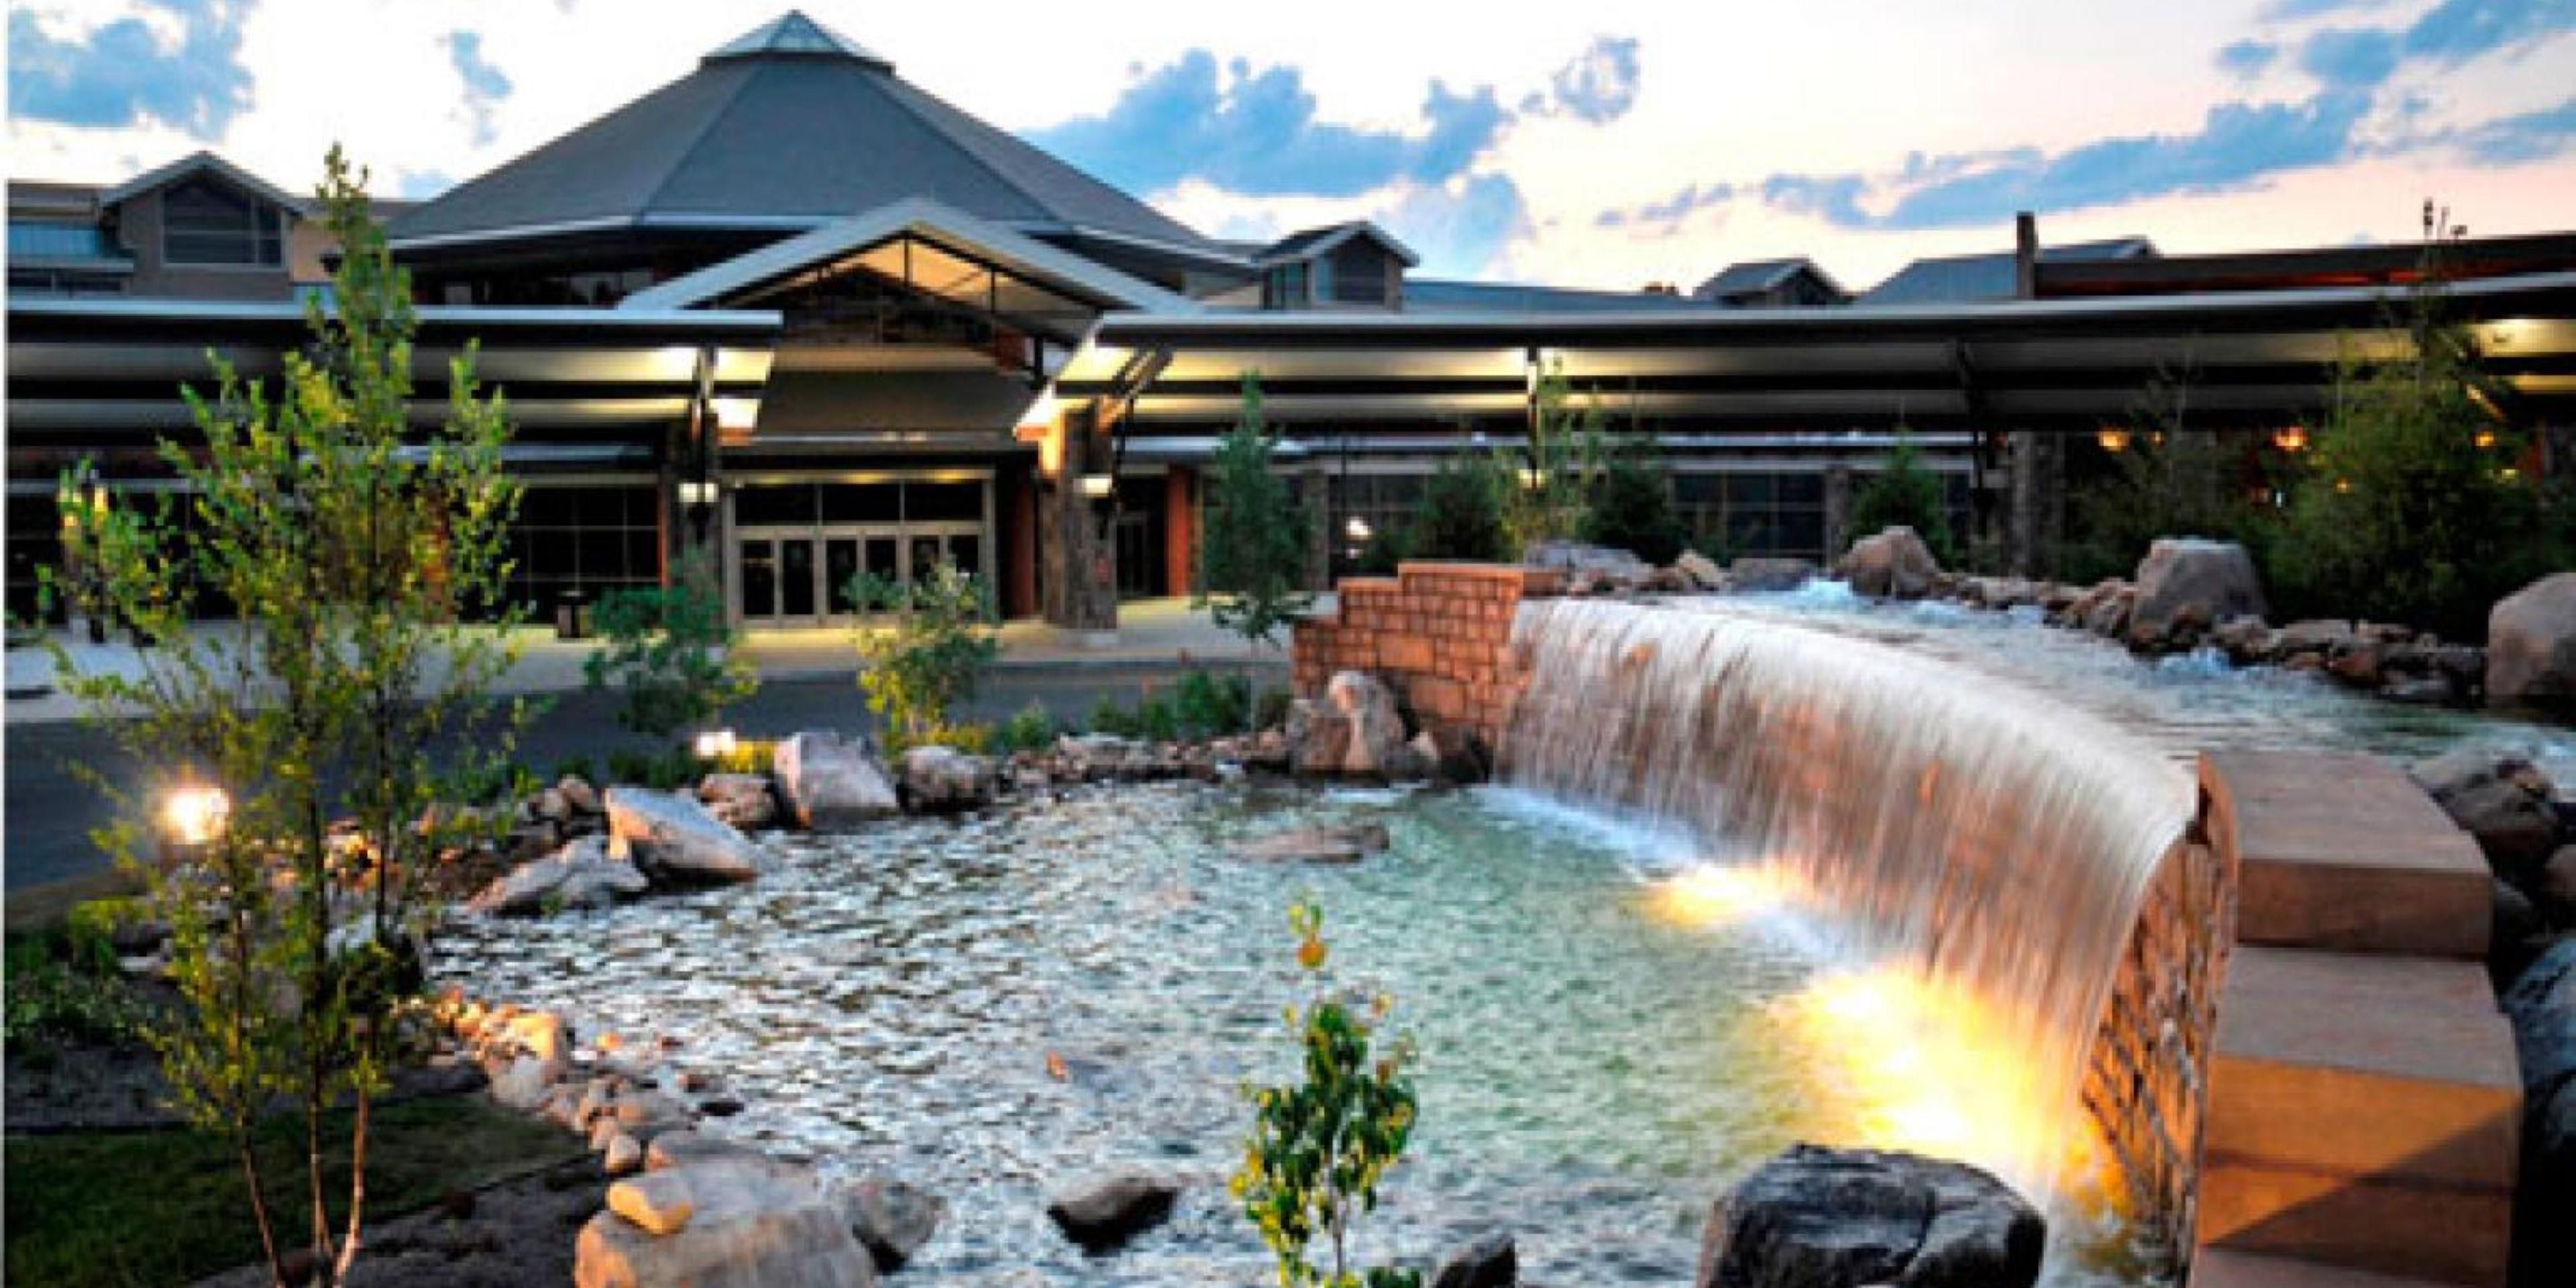 The Sevierville Convention Center also referred to as the Sevierville Events Center is located off Winfield Dunn Parkway (Hwy 66) and just 5.2 miles from the Holiday Inn Express Pigeon Forge-Sevierville.  Our hotel is a great place to relax  after attending one of the many competitions held at the Events Center.  